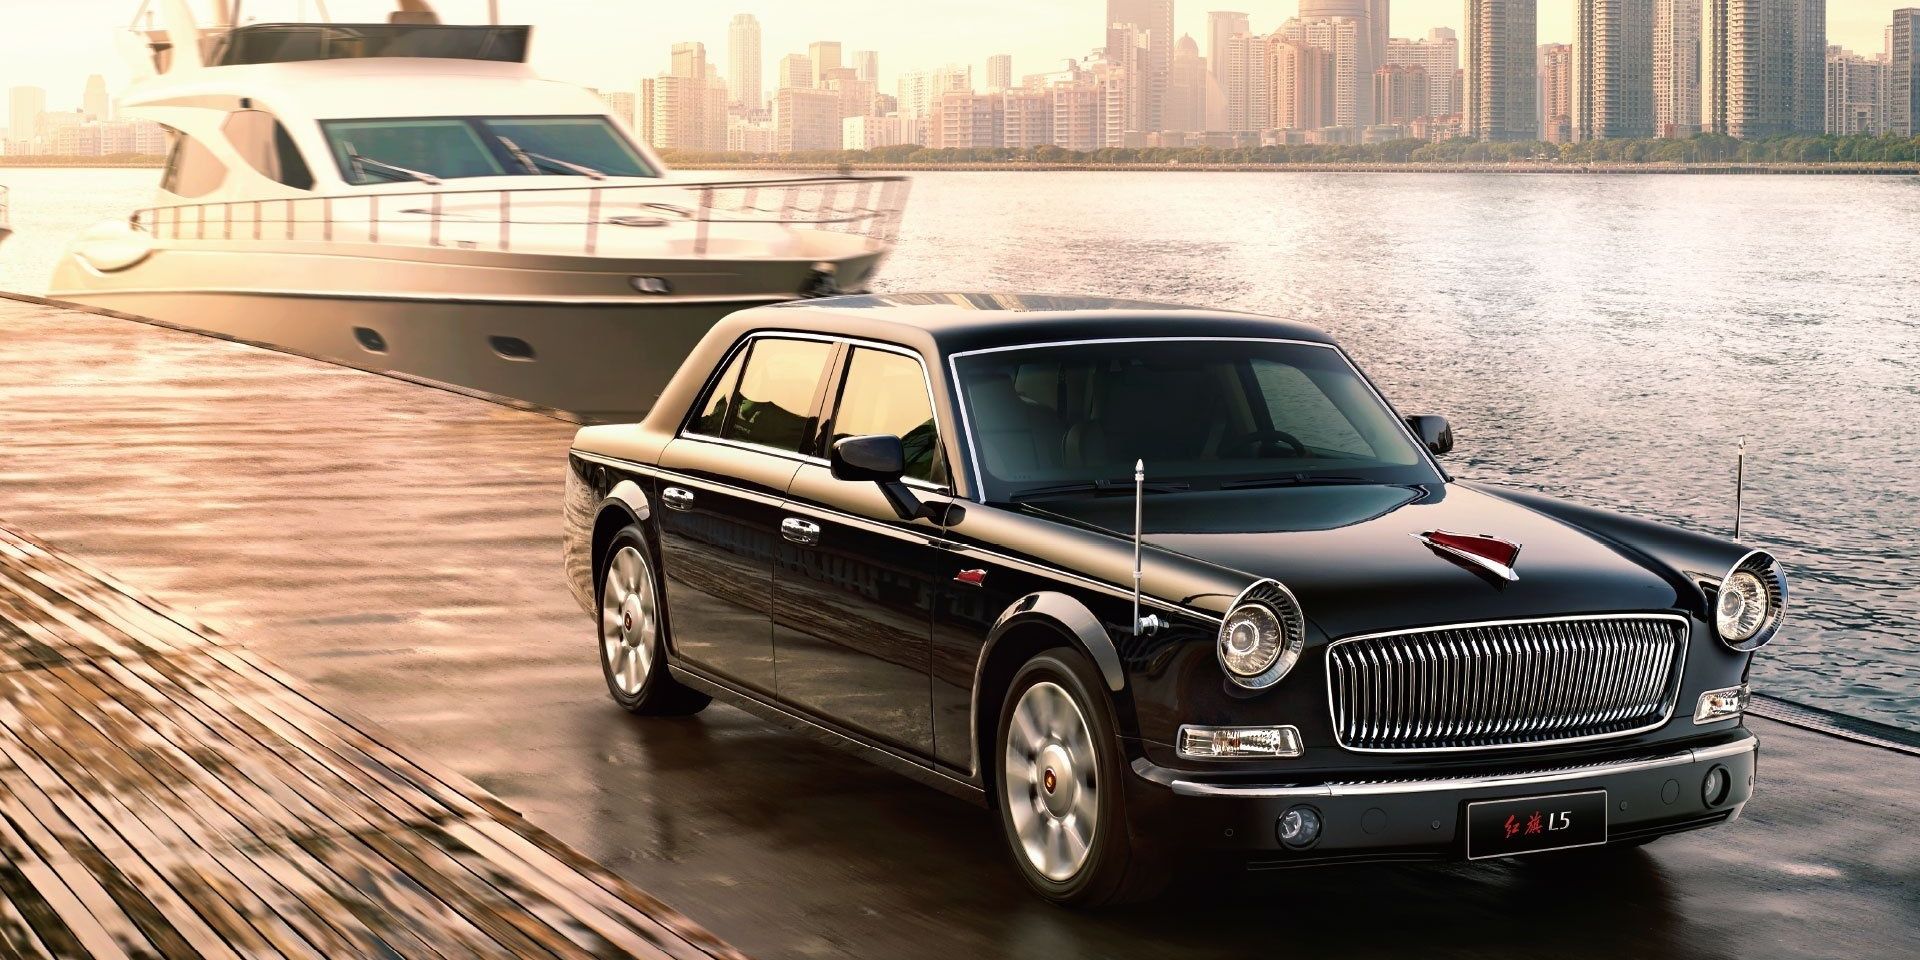 8 Most Luxurious Cars That Aren't A Rolls-Royce